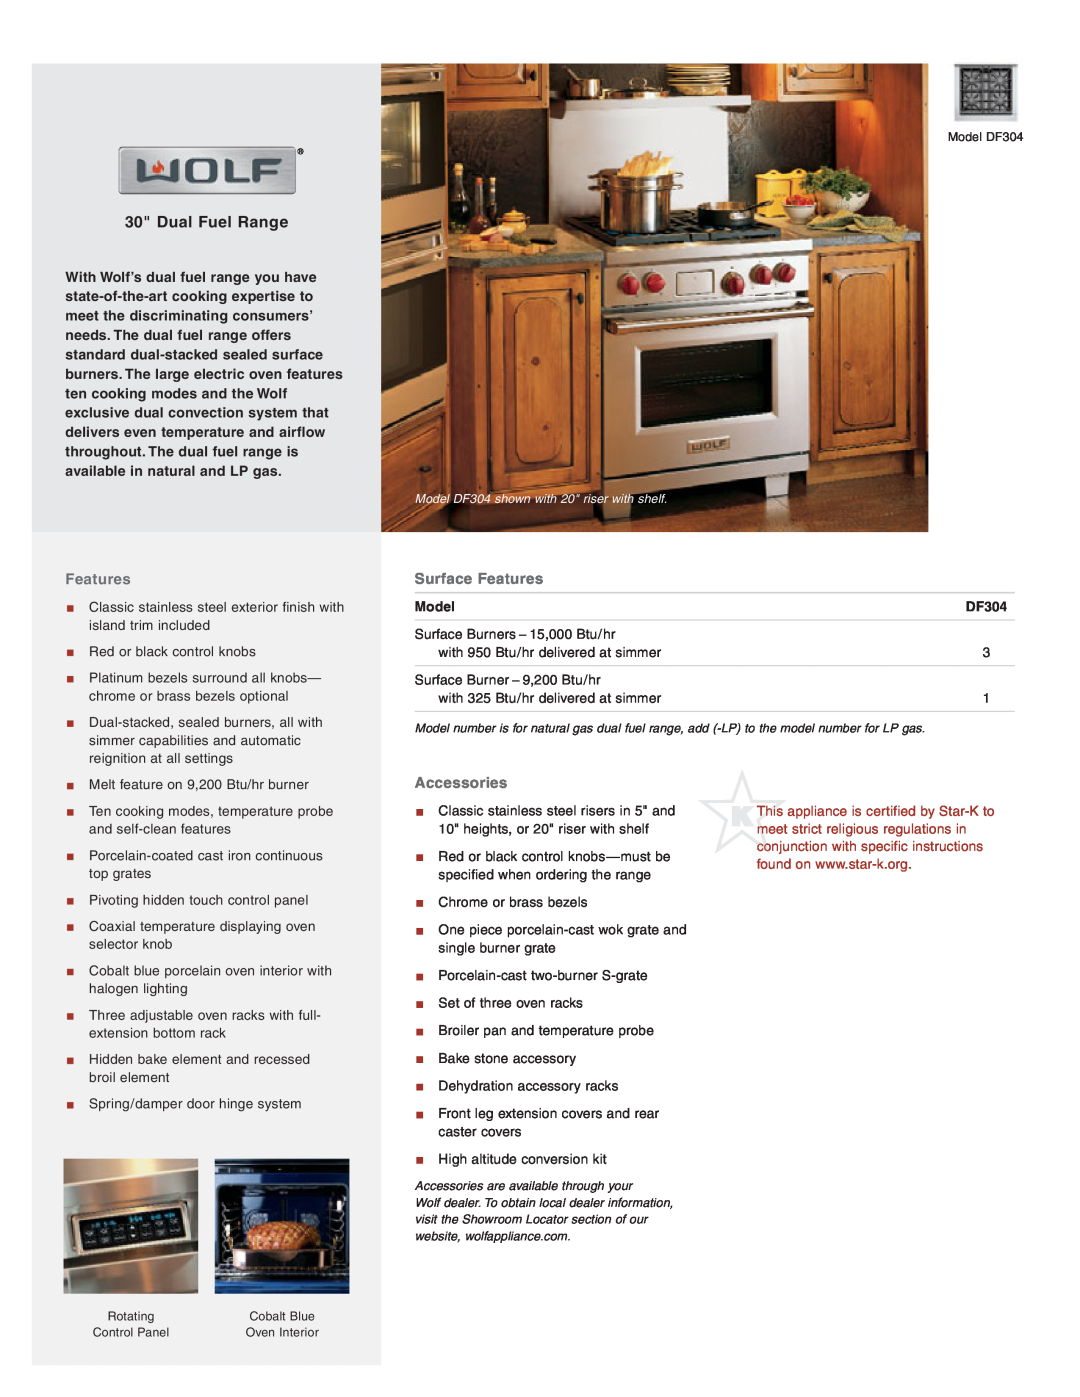 Wolf Appliance Company DF304 manual Dual Fuel Range, Surface Features, Accessories, Model 